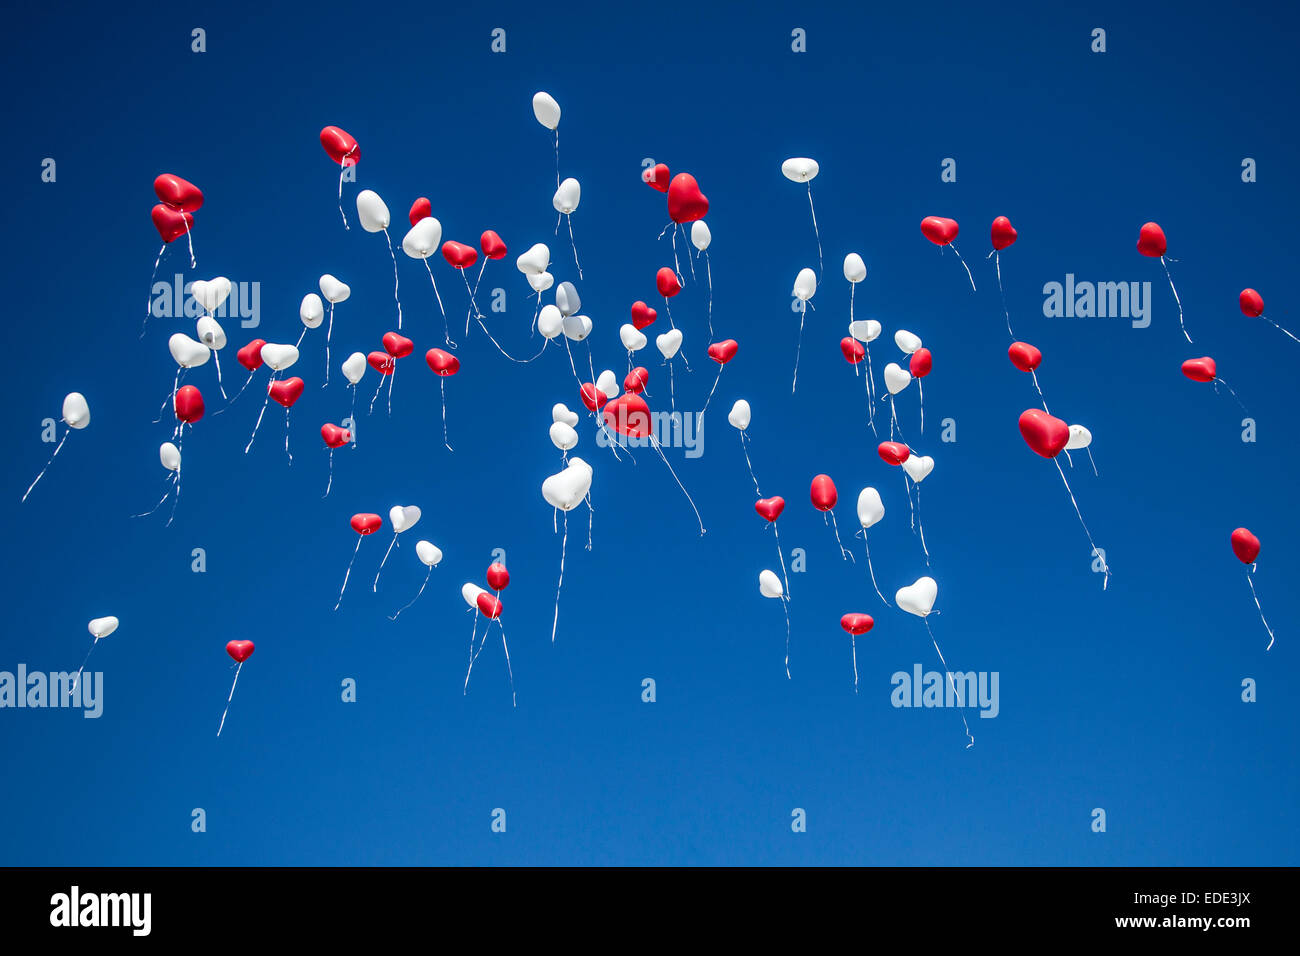 White and read hart shaped balloons flying in the blue sky Stock Photo